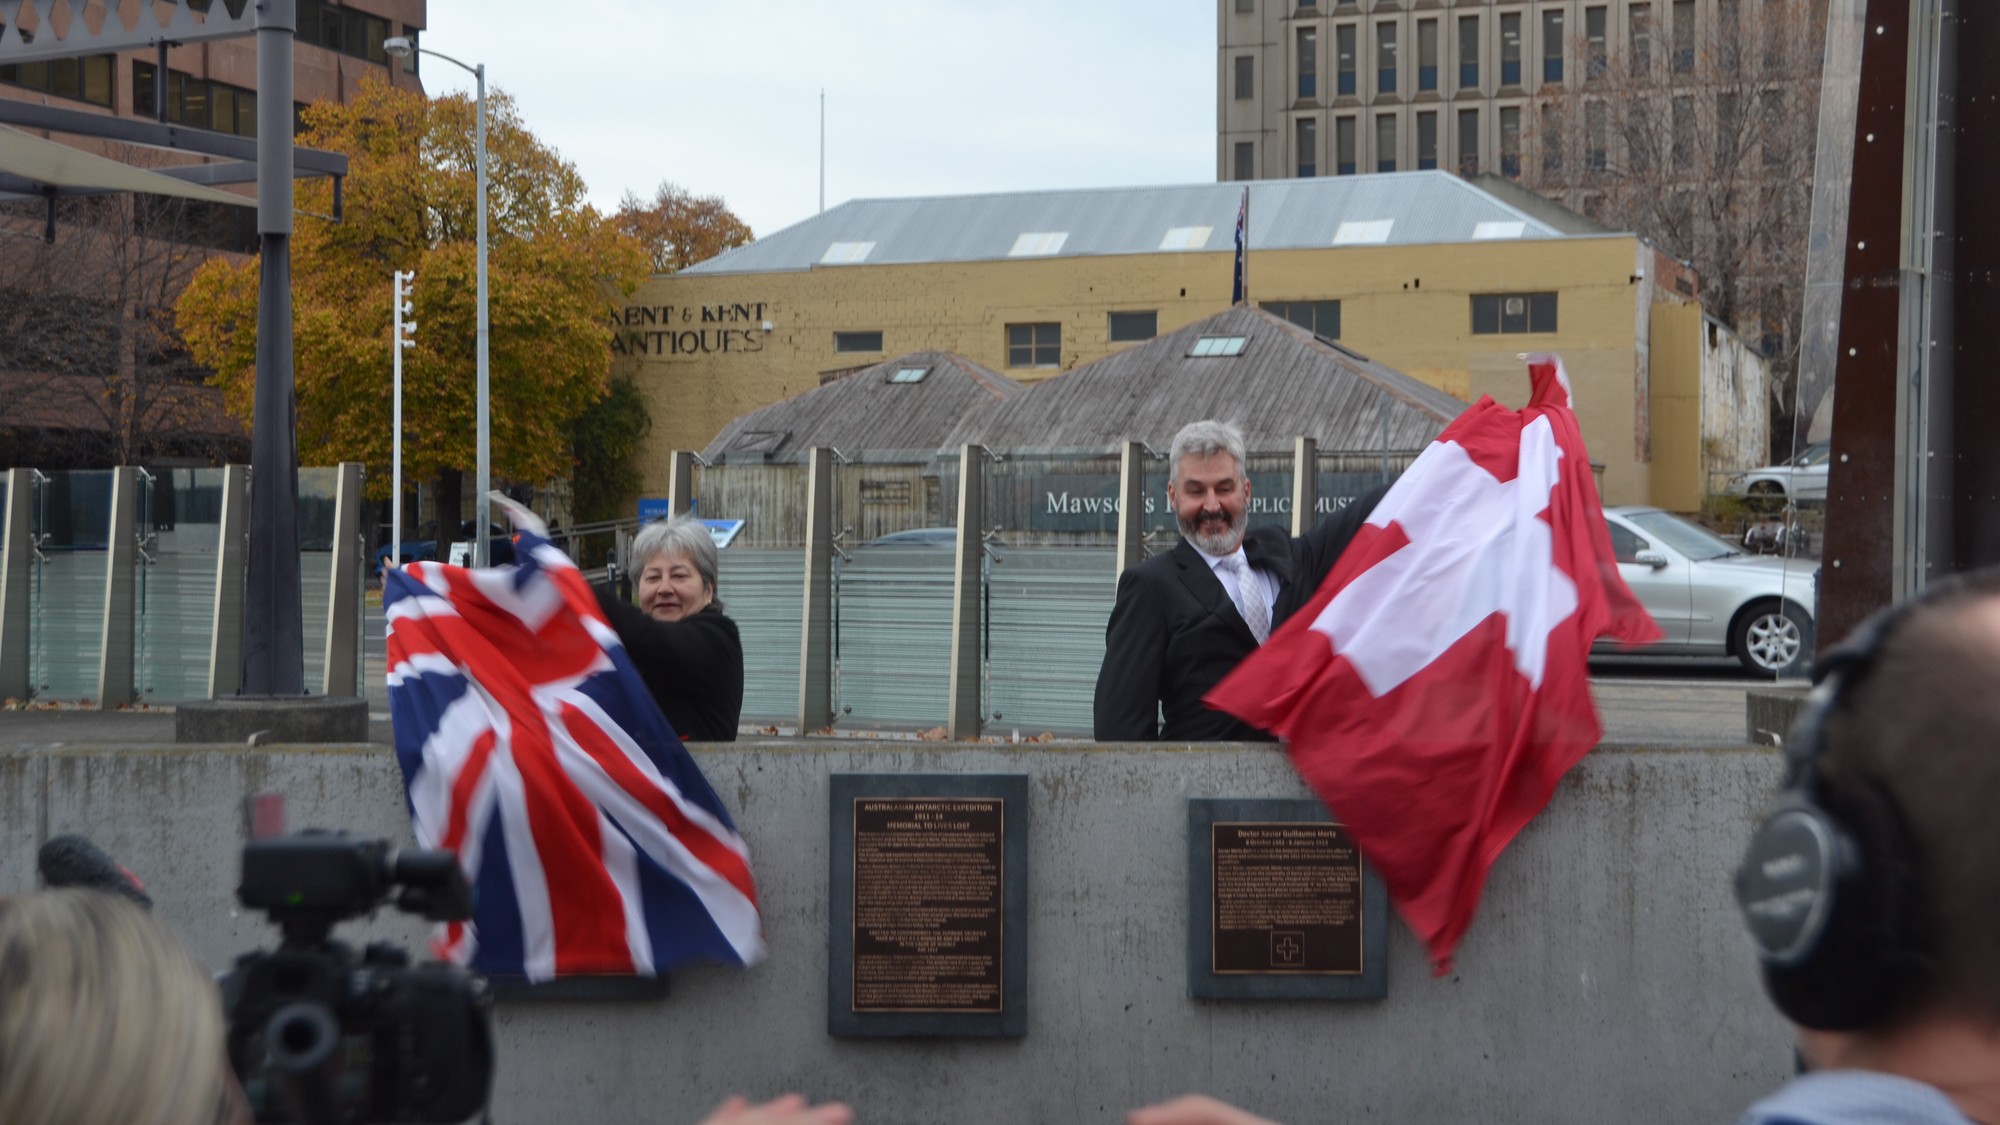 Ambassador Pedro Zwahlen and British High Commissioner Vicki Treadell unveiling a memorial to Antarctic research pioneers Dr Xavier Mertz and Belgrave Ninnis